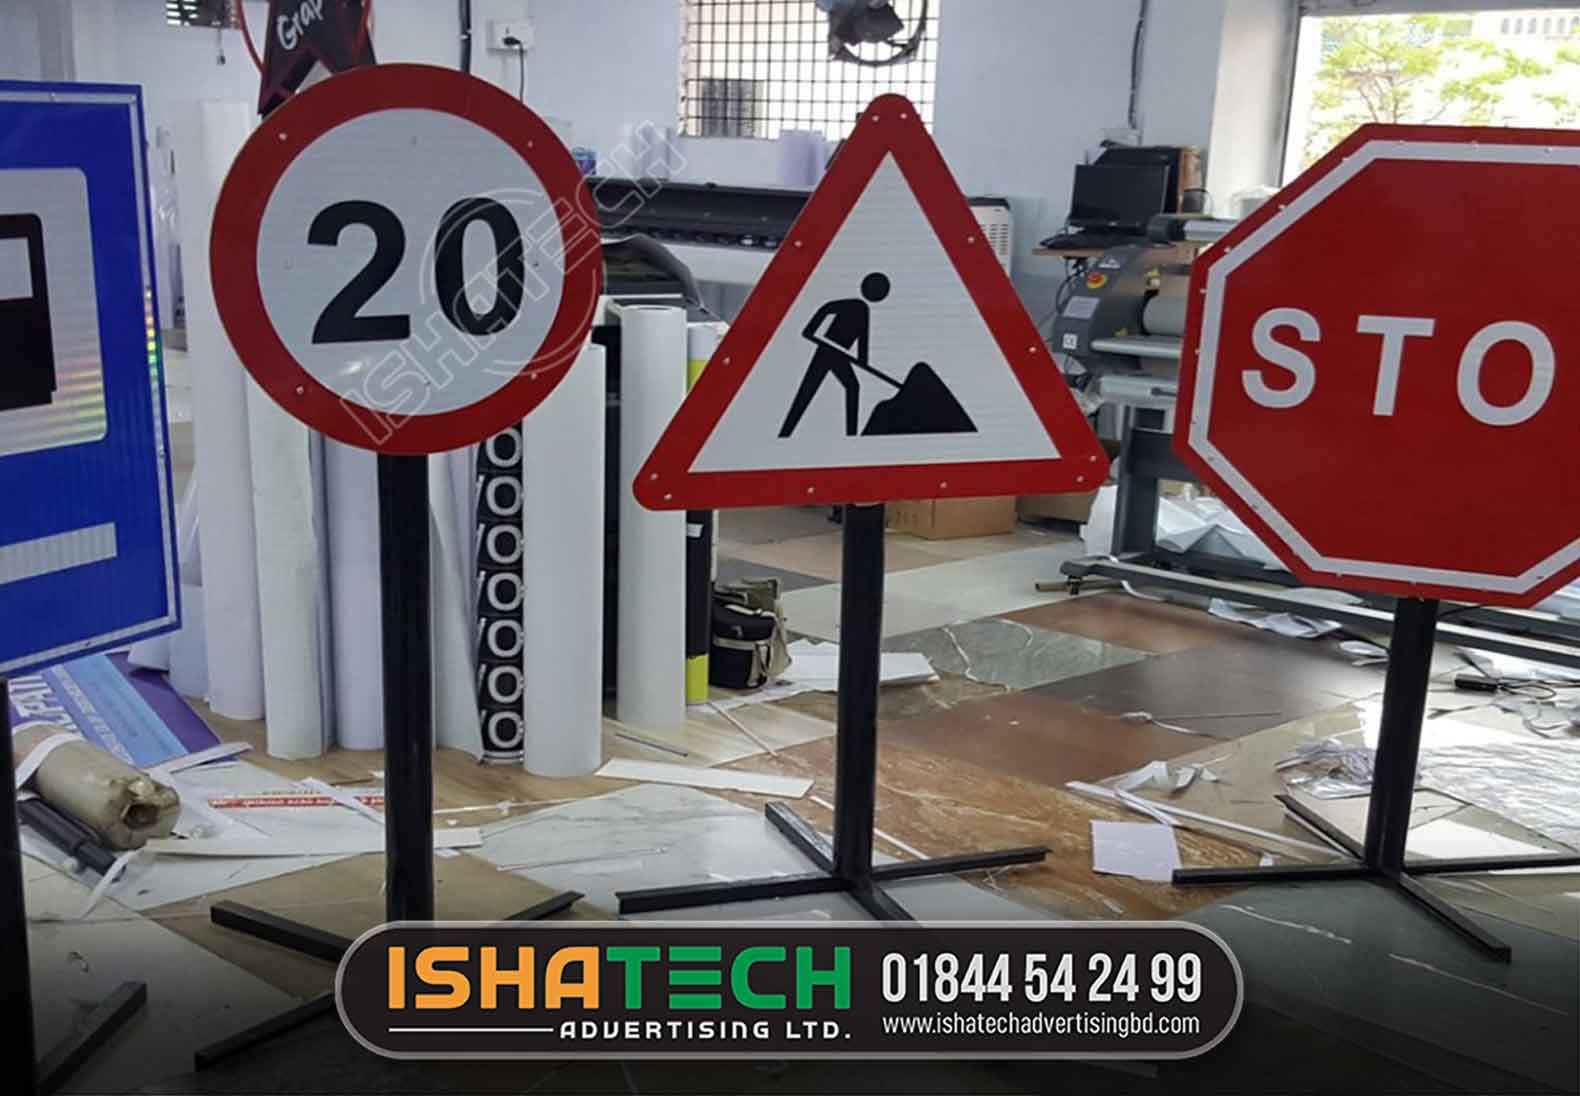 ROAD SIGN, TRAFFIC SIGN, METAL SIGN, TRAFFIC DIRECTIONAL SIGN